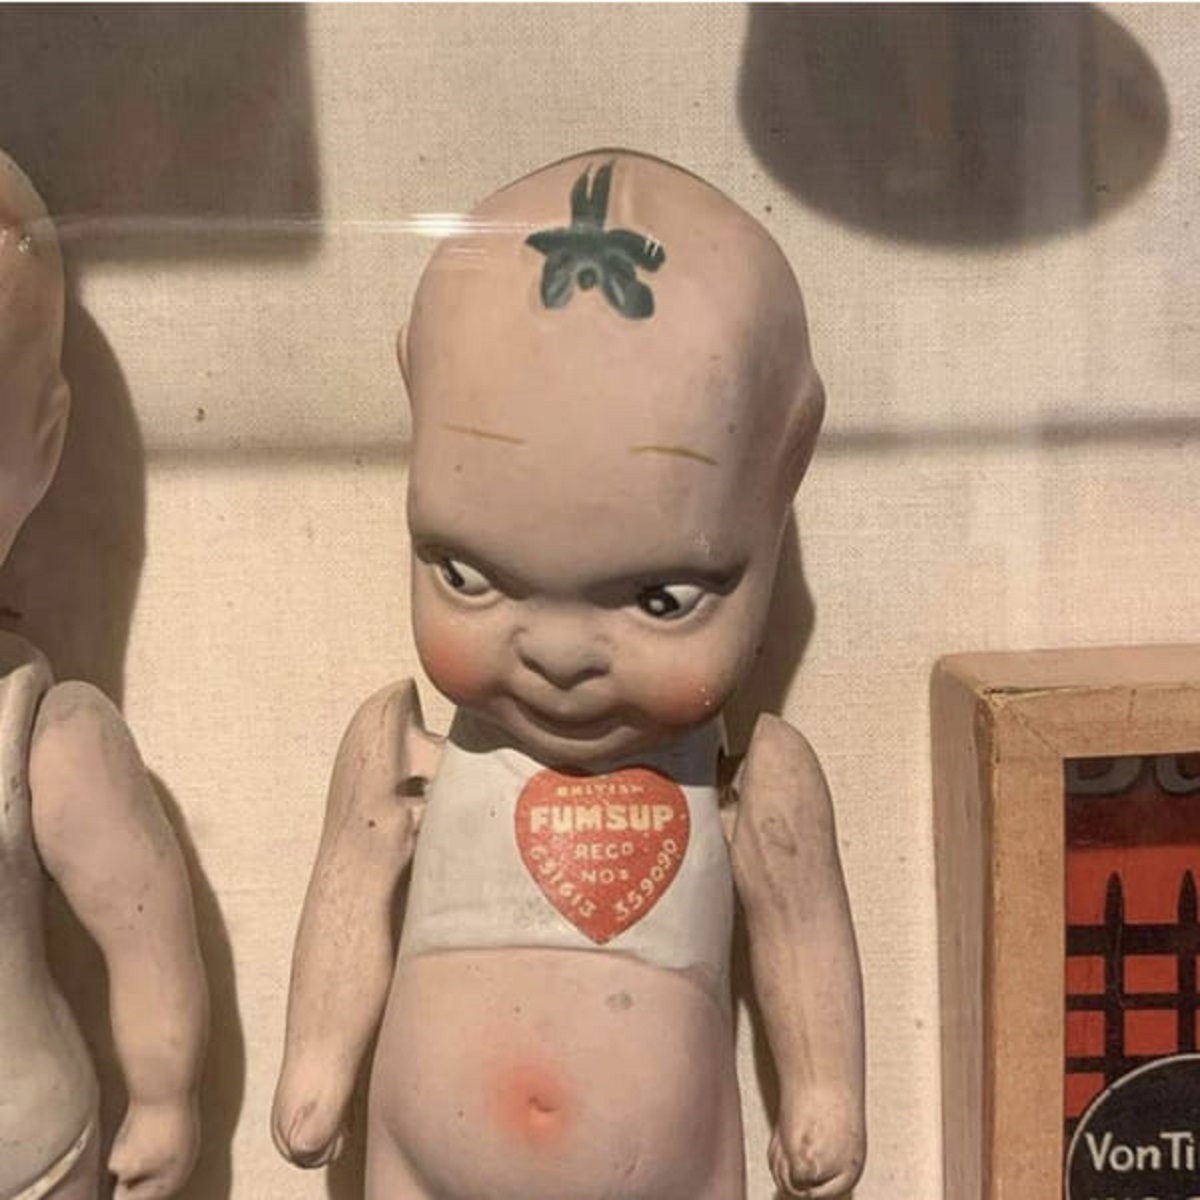 “This doll at a toy museum”